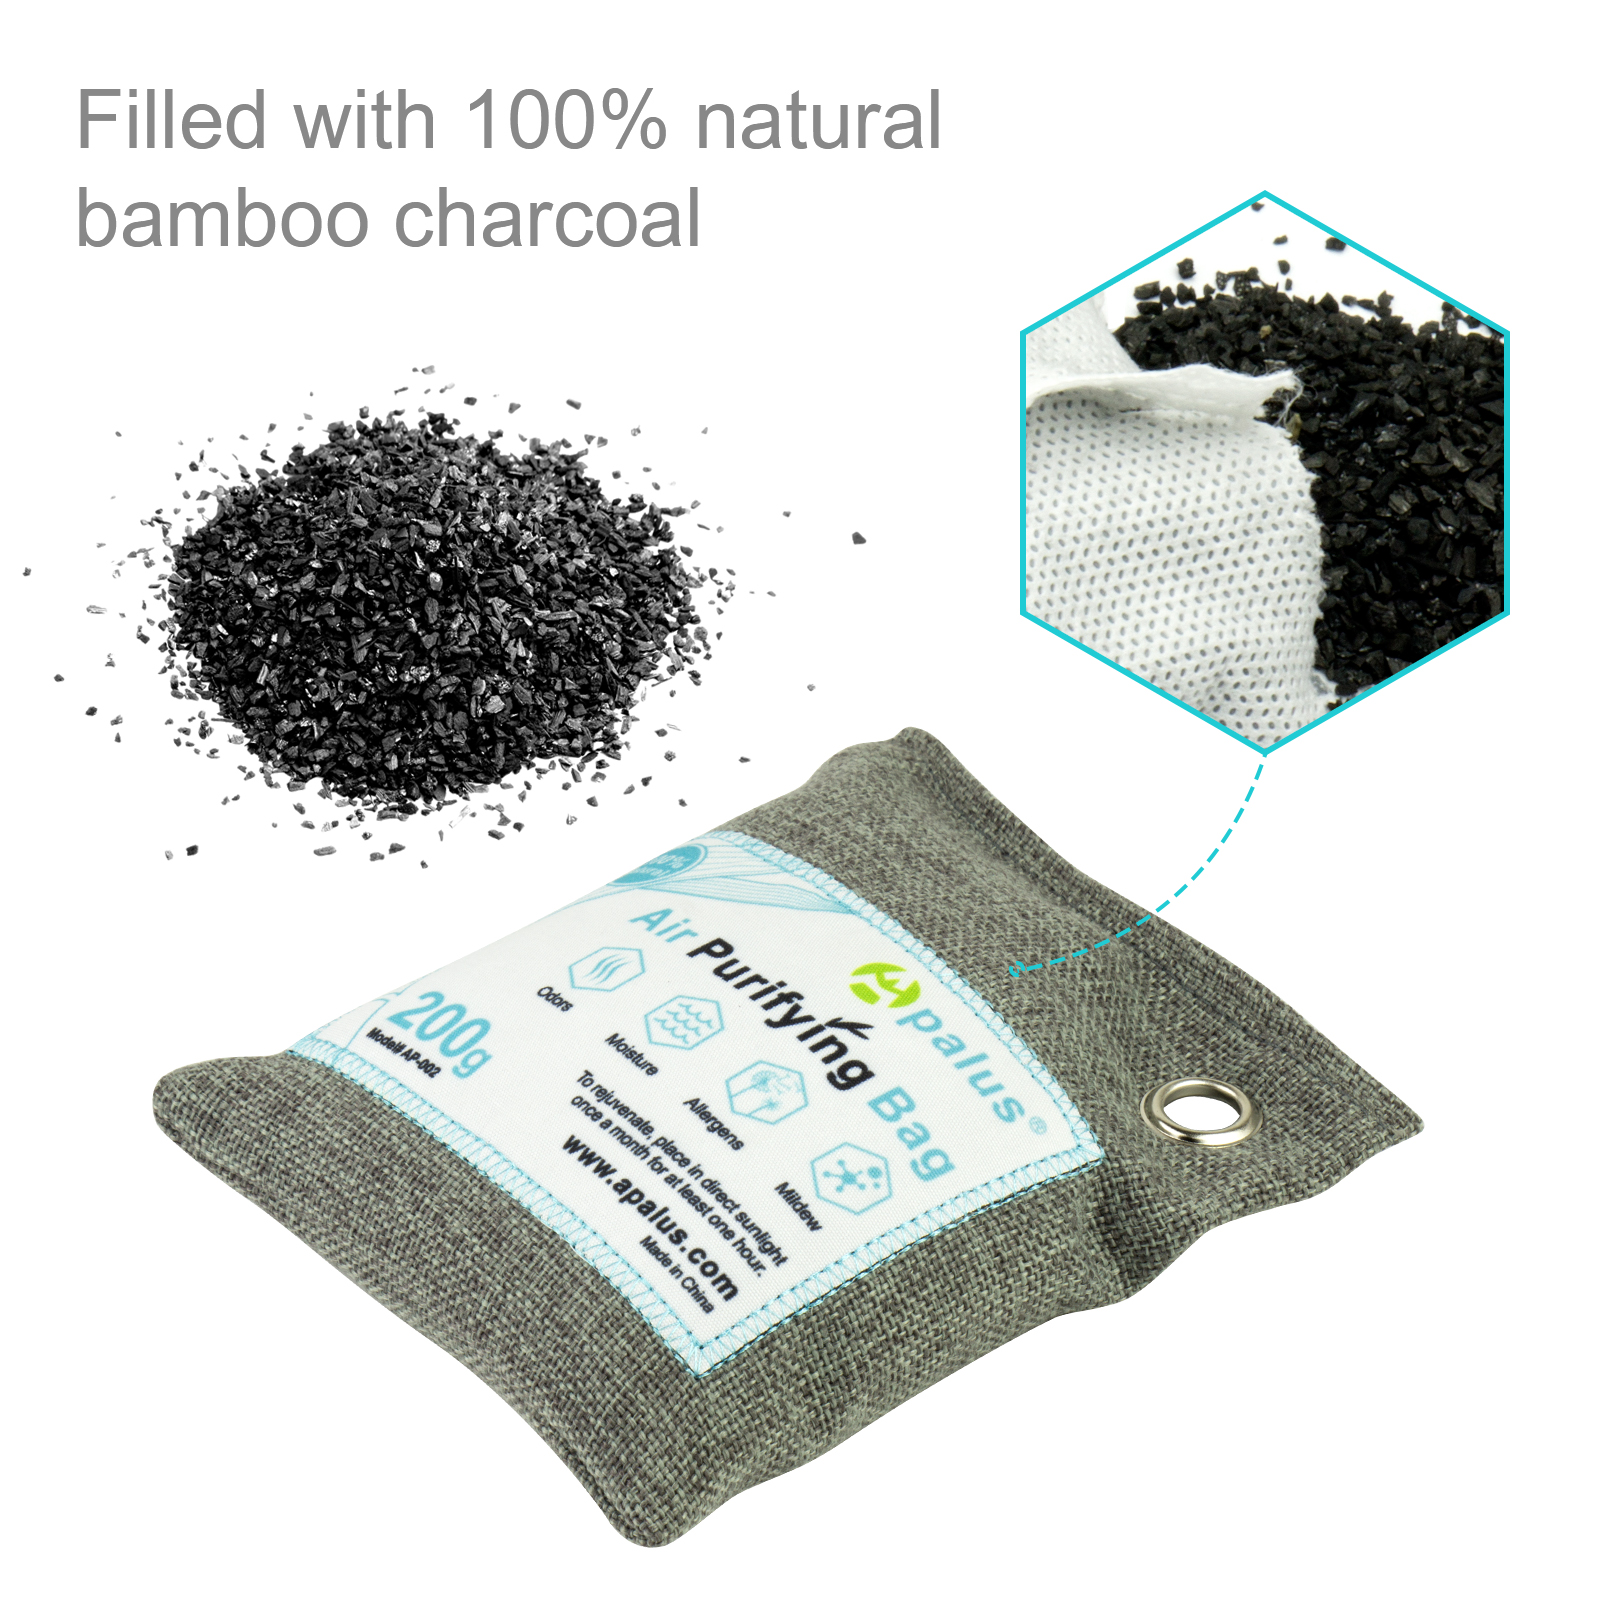 Apalus Air Purifying Bag, Bamboo Activated Charcoal Air Freshener, Car Air Dehumidifier, Deodorizer and Purifier Bags-100% Natural & Chemical Free Moisture, Odor Absorber, 200G 